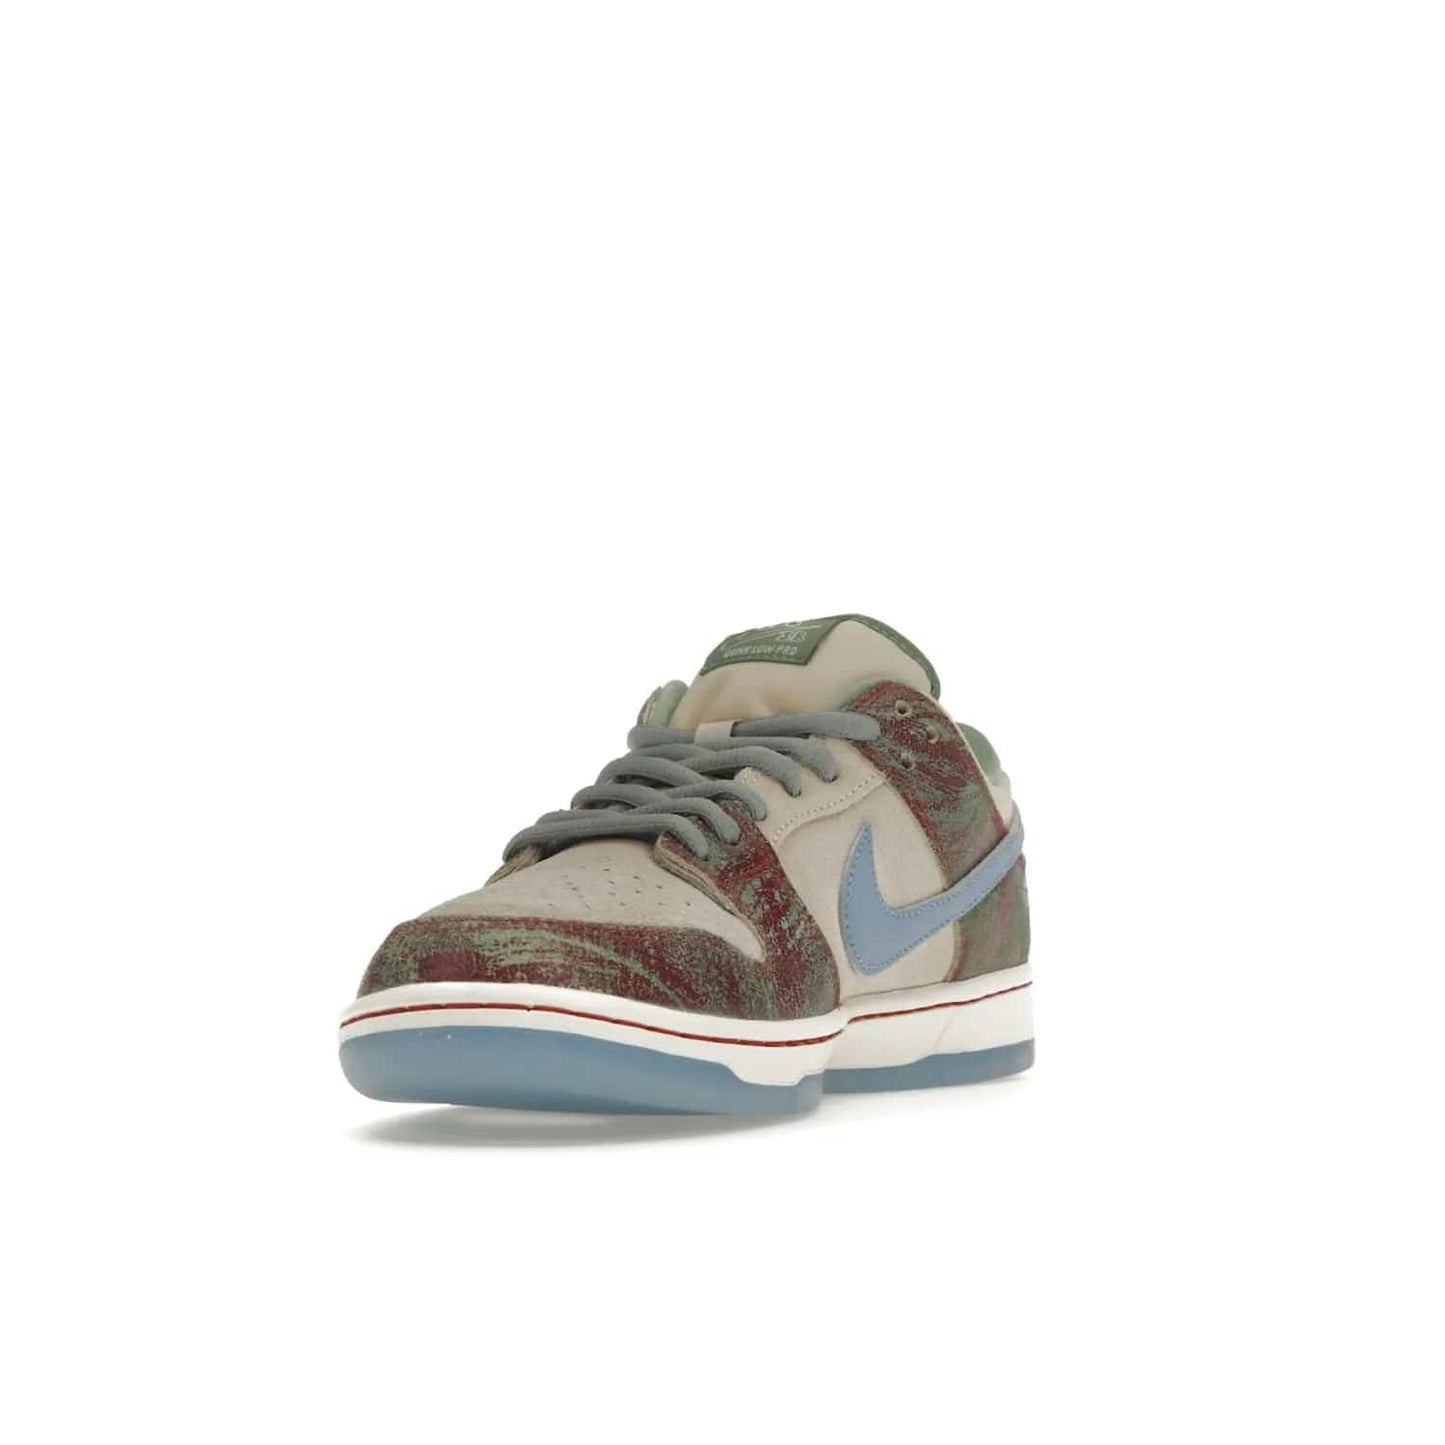 Nike SB Dunk Low Crenshaw Skate Club - Image 13 - Only at www.BallersClubKickz.com - Introducing the Nike SB Dunk Low Crenshaw Skate Club! Classic skate shoes with Sail and Light Blue upper, Cedar accents, padded collars and superior grip for comfortable, stable performance and style. Ideal for any skate session.